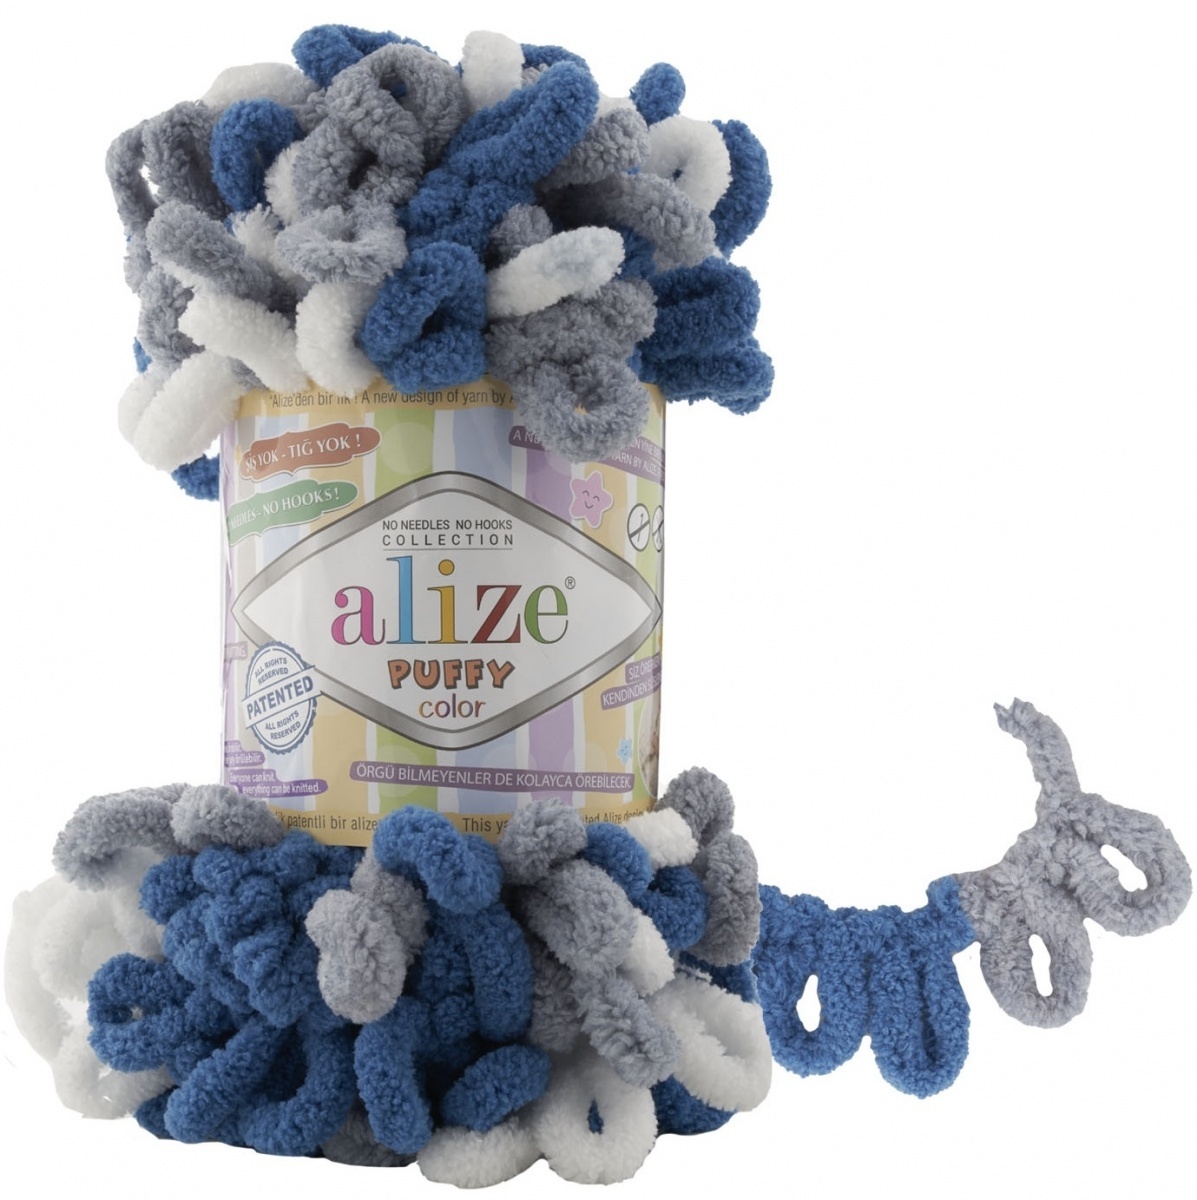 Alize Puffy Color, 100% Micropolyester 5 Skein Value Pack, 500g фото 60